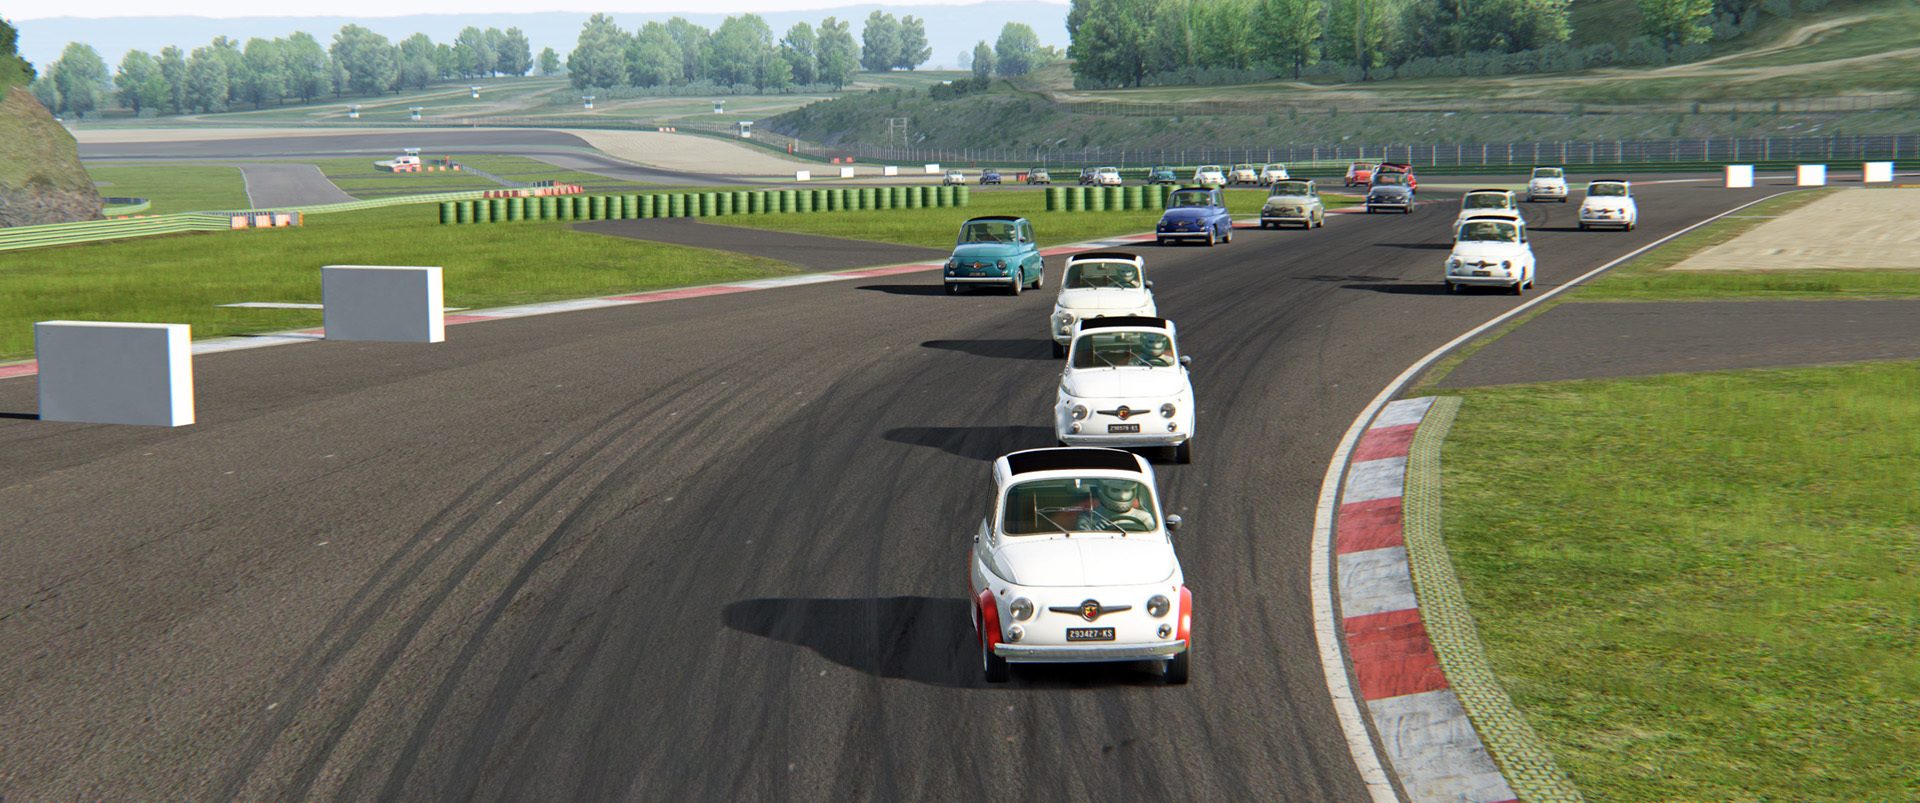 The Day to Night Mod That Changes Assetto Corsa Forever – GTPlanet